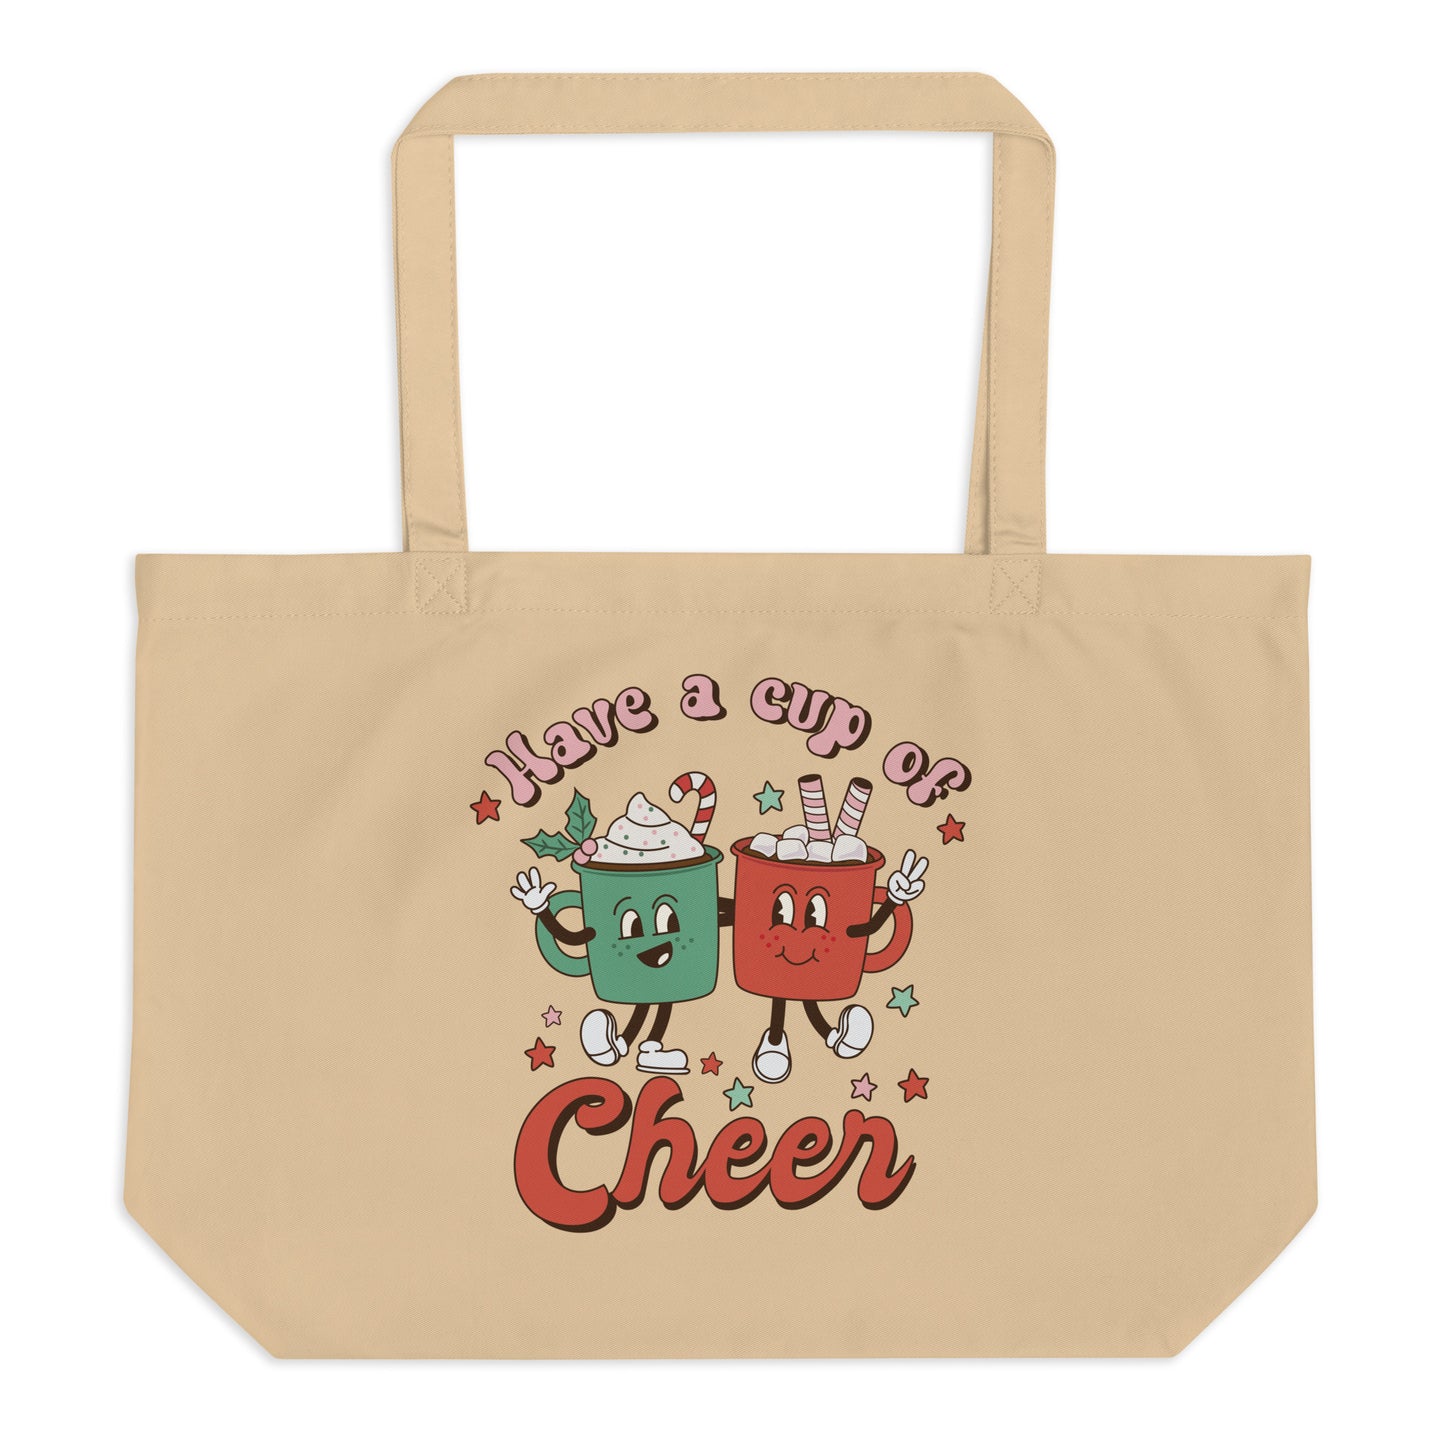 Have a Cup of Cheer Large organic tote bag